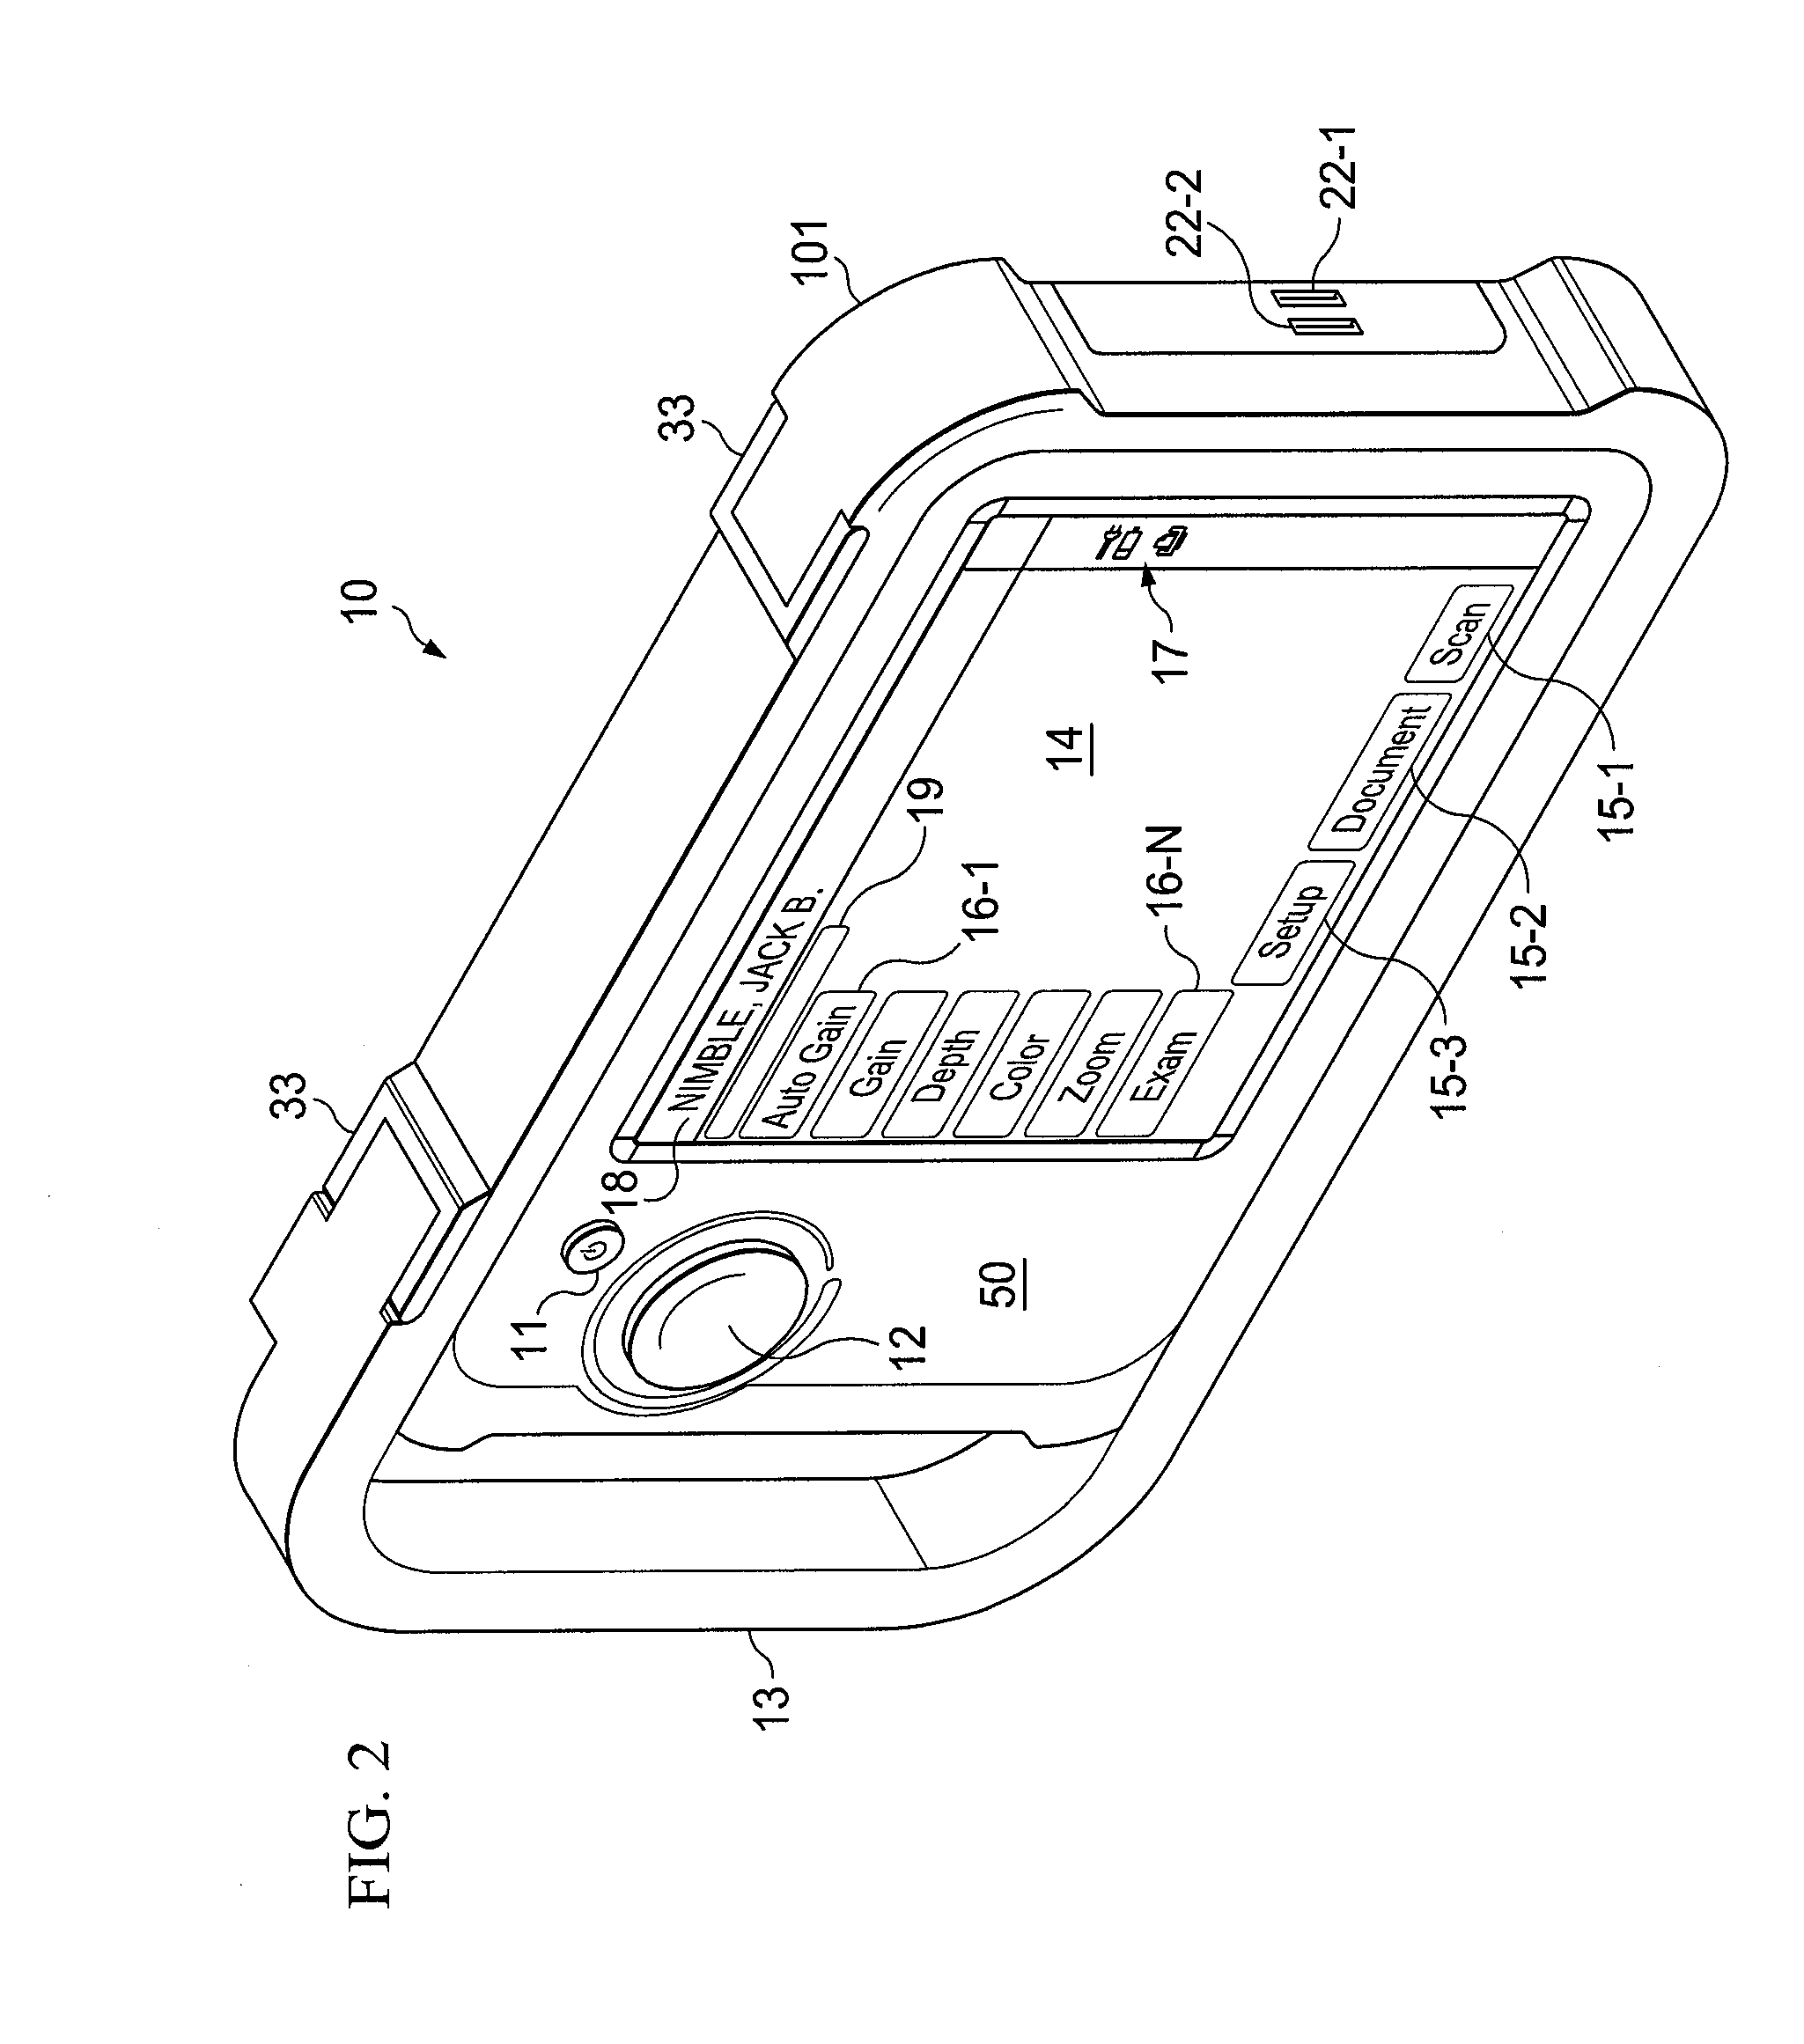 Ultrasound system having a simplified user interface